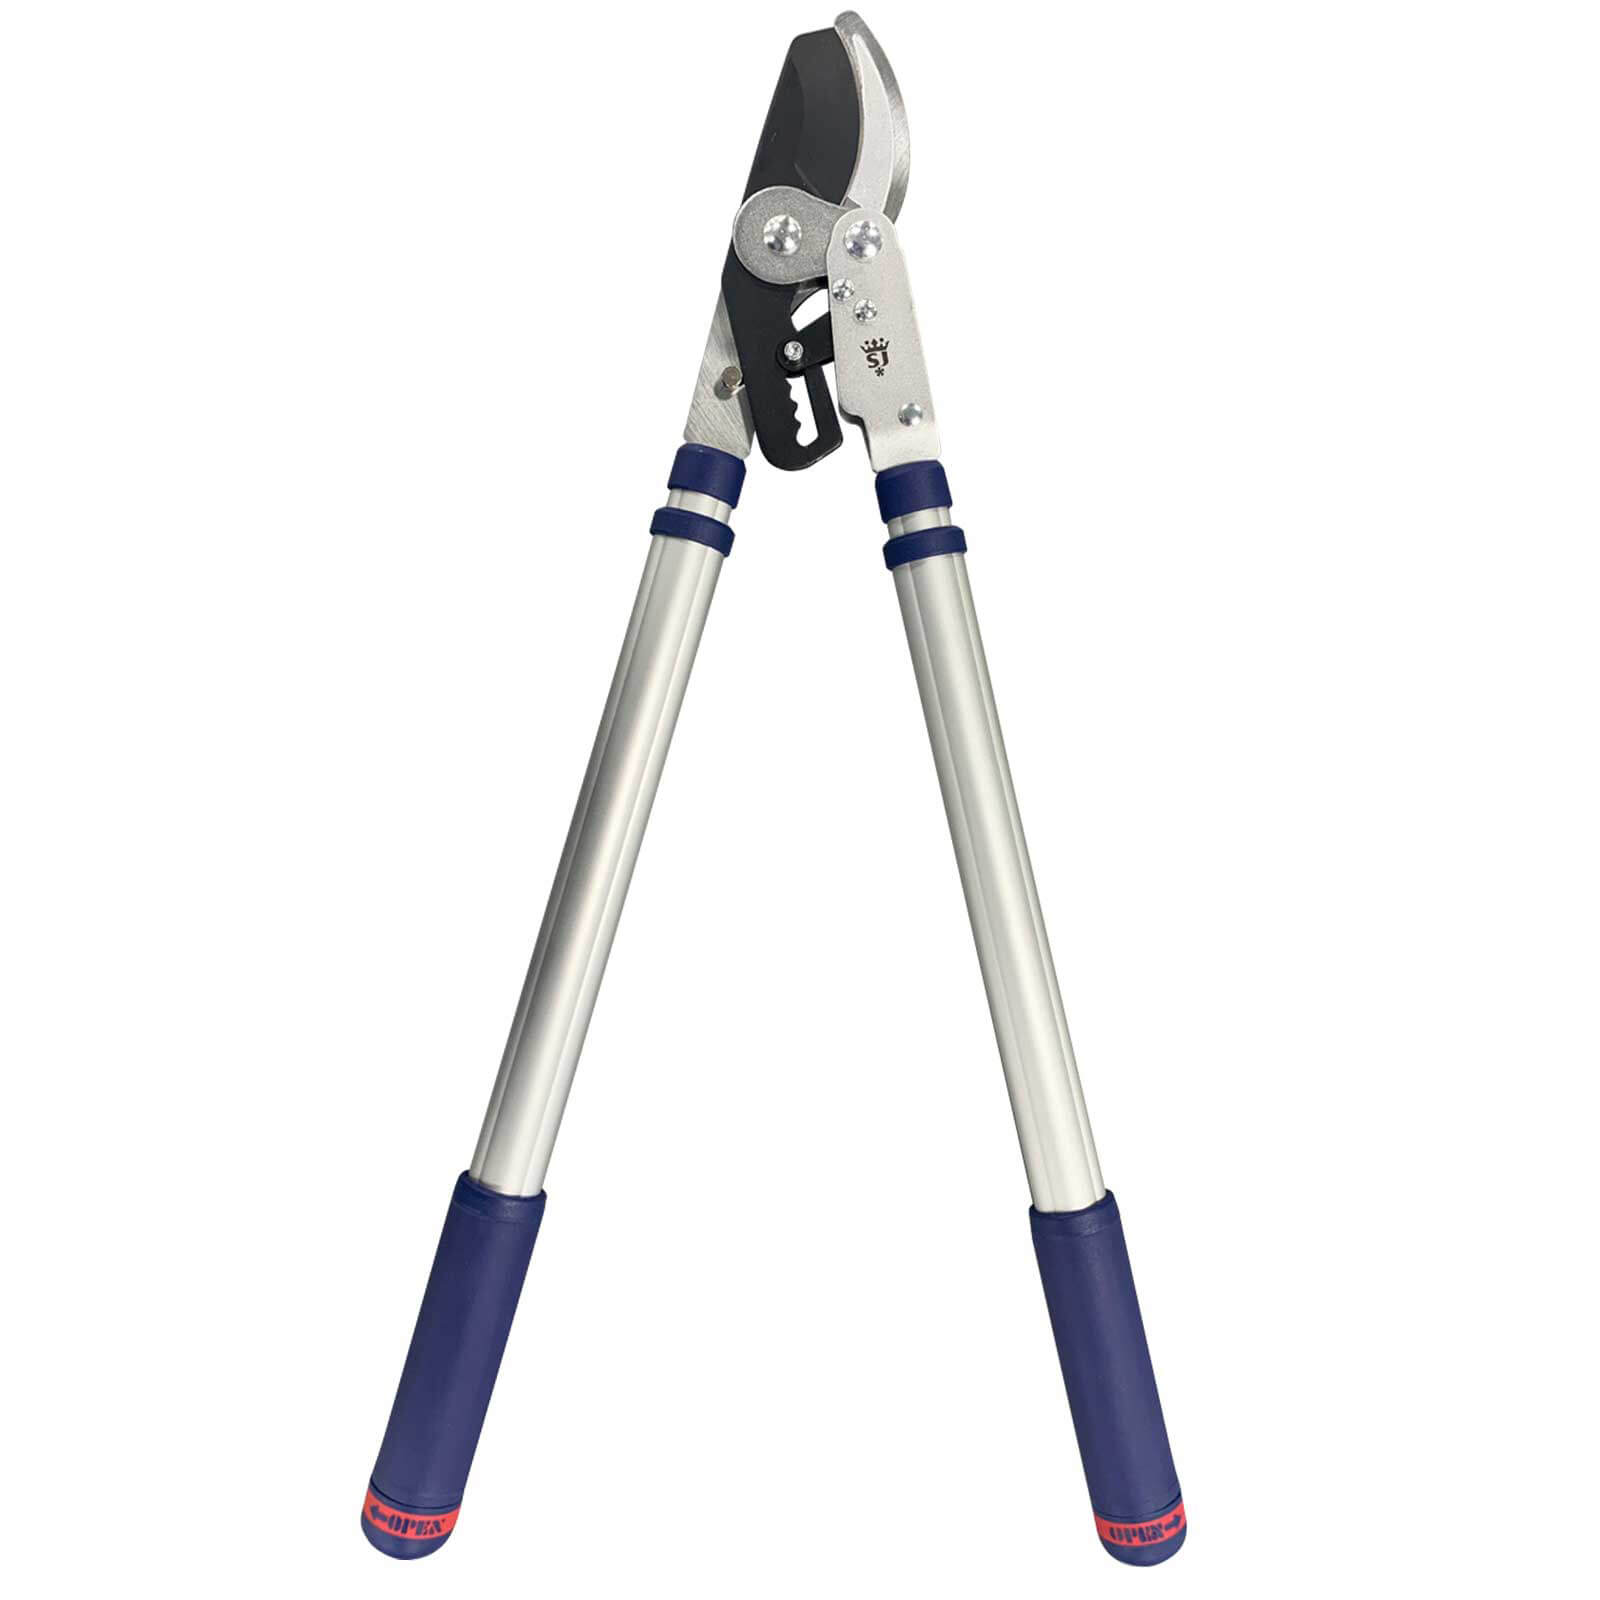 Image of Spear and Jackson Razorsharp Advantage Telescopic Ratchet Bypass Loppers 720mm